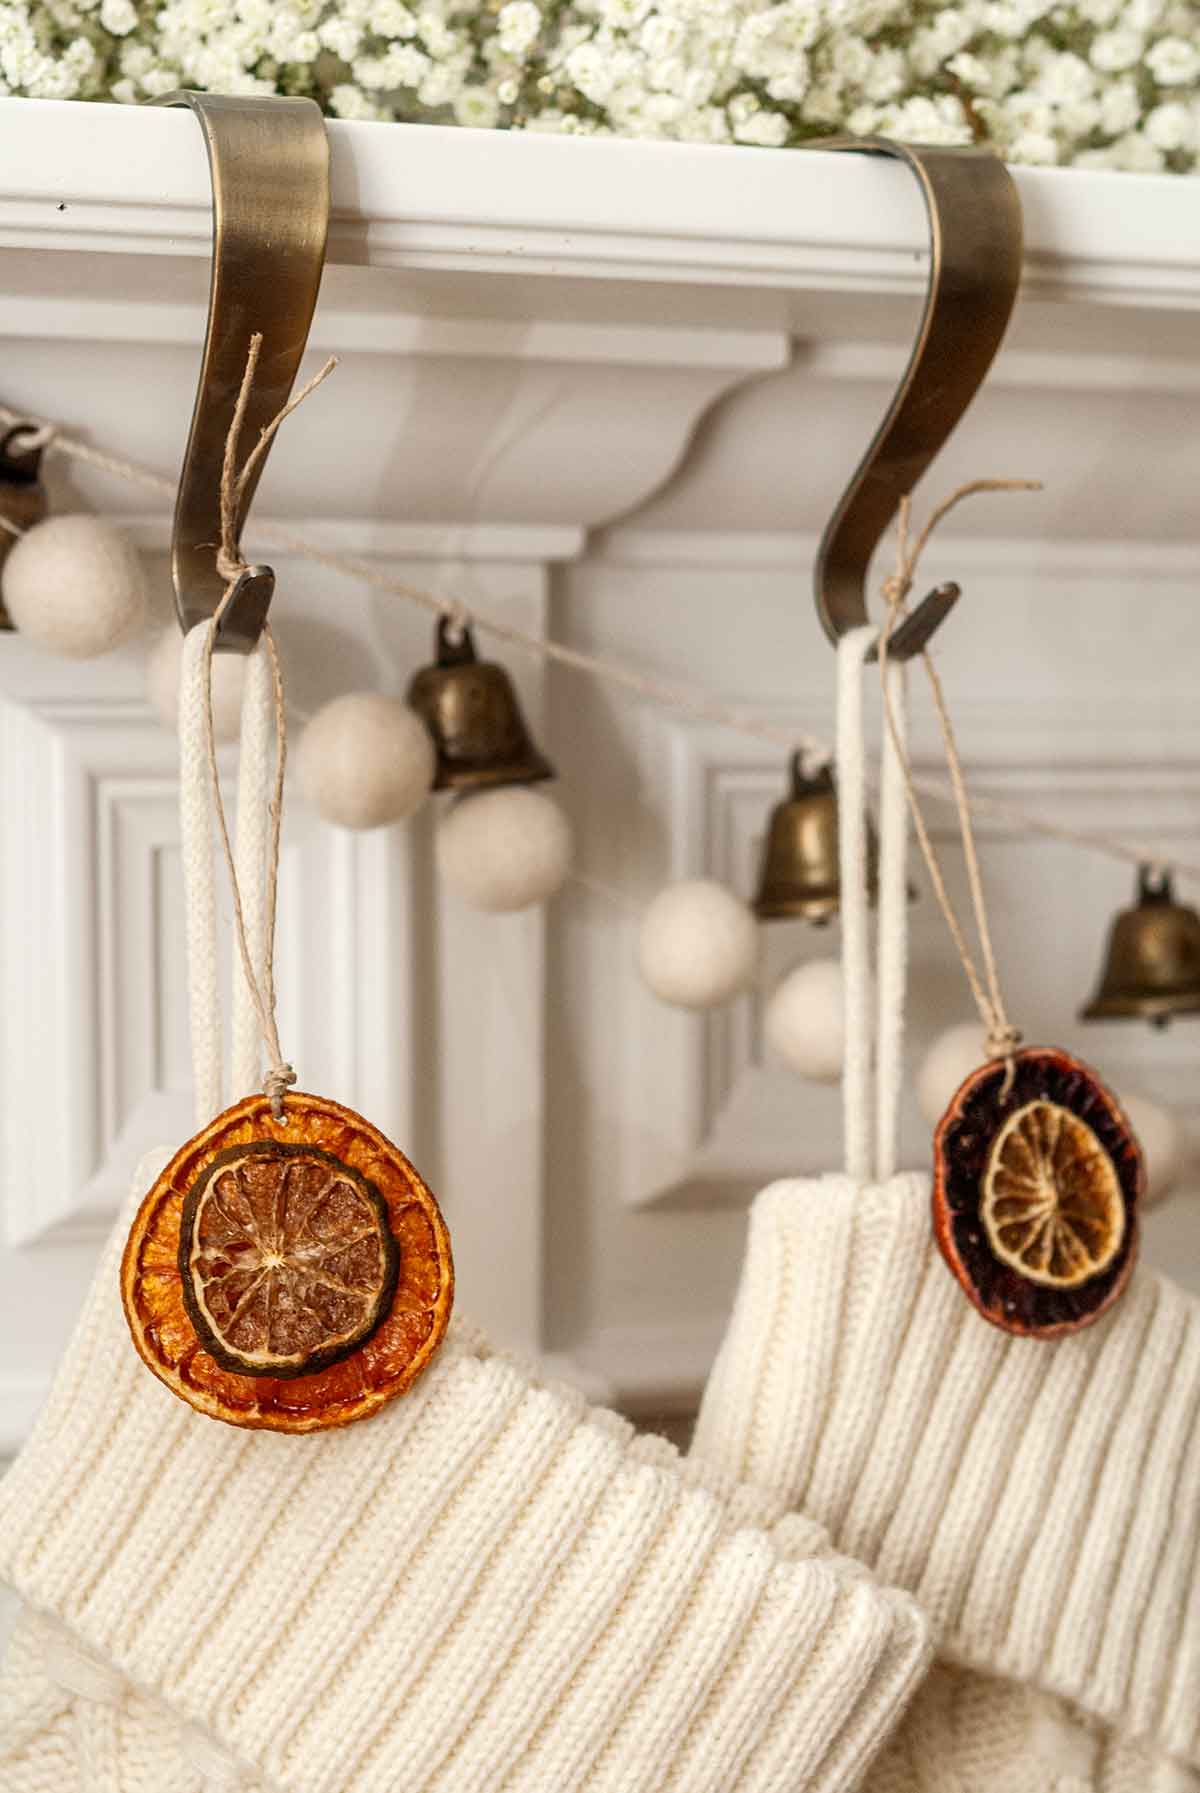 The citrus ornaments hung atop 2 christmas stockings hanging from a mantle.